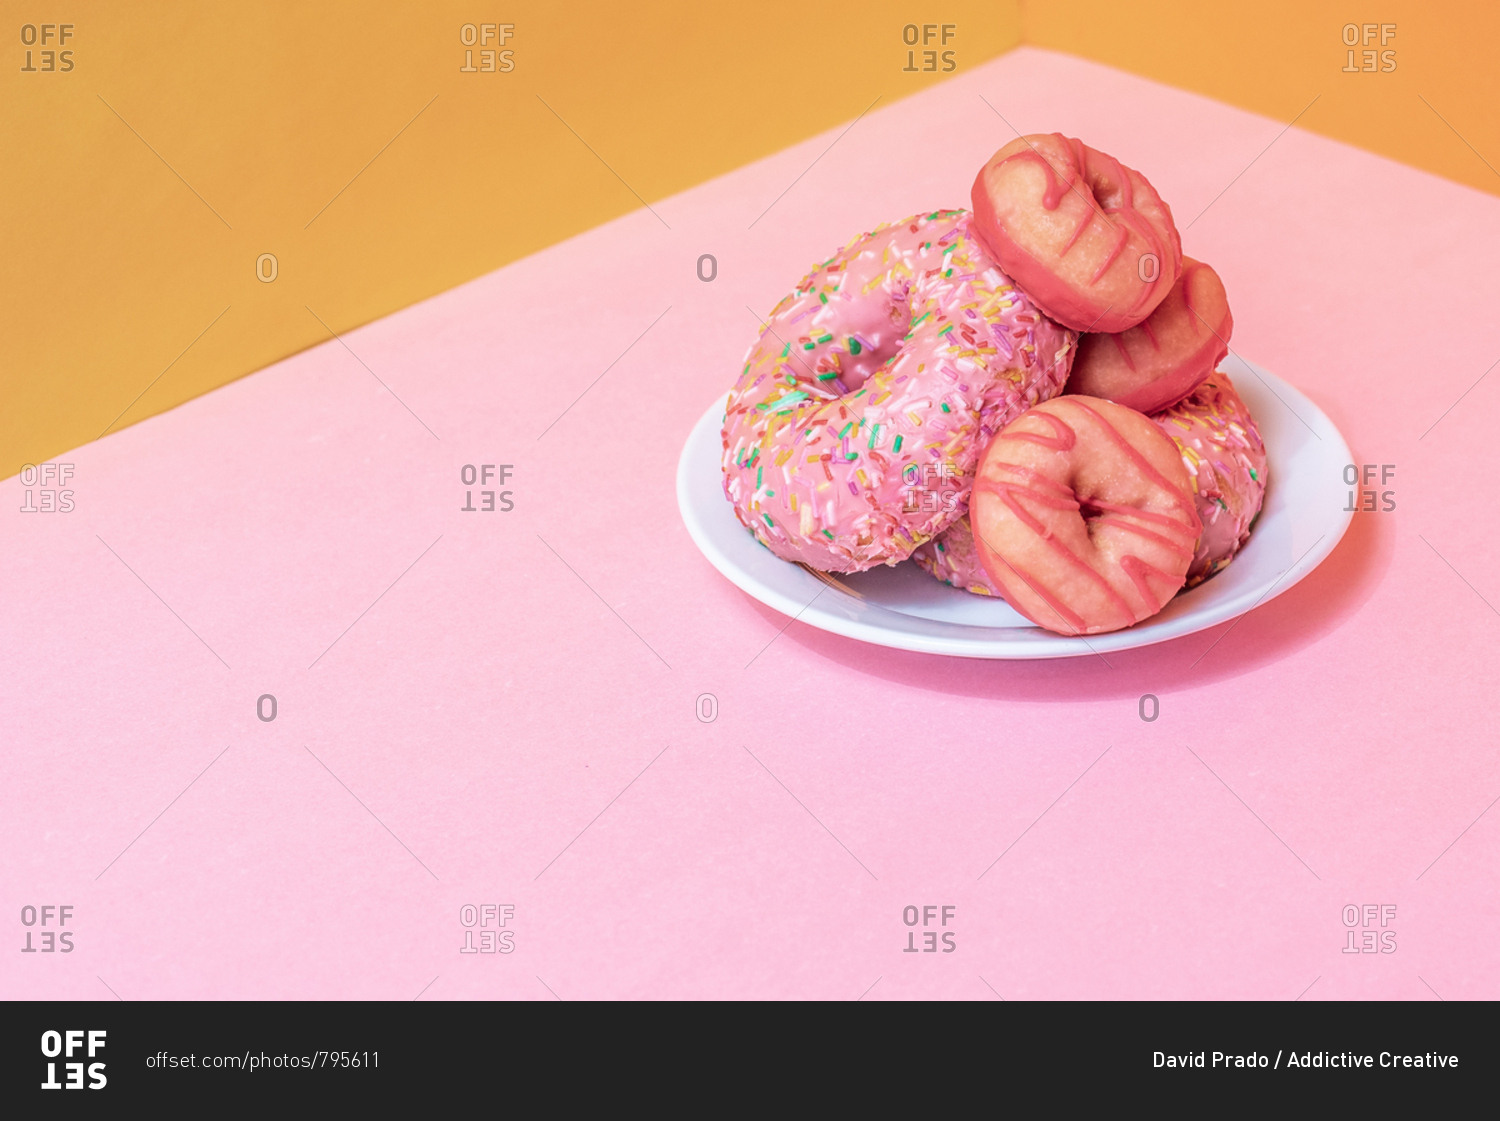 Pink doughnuts in a colorful background